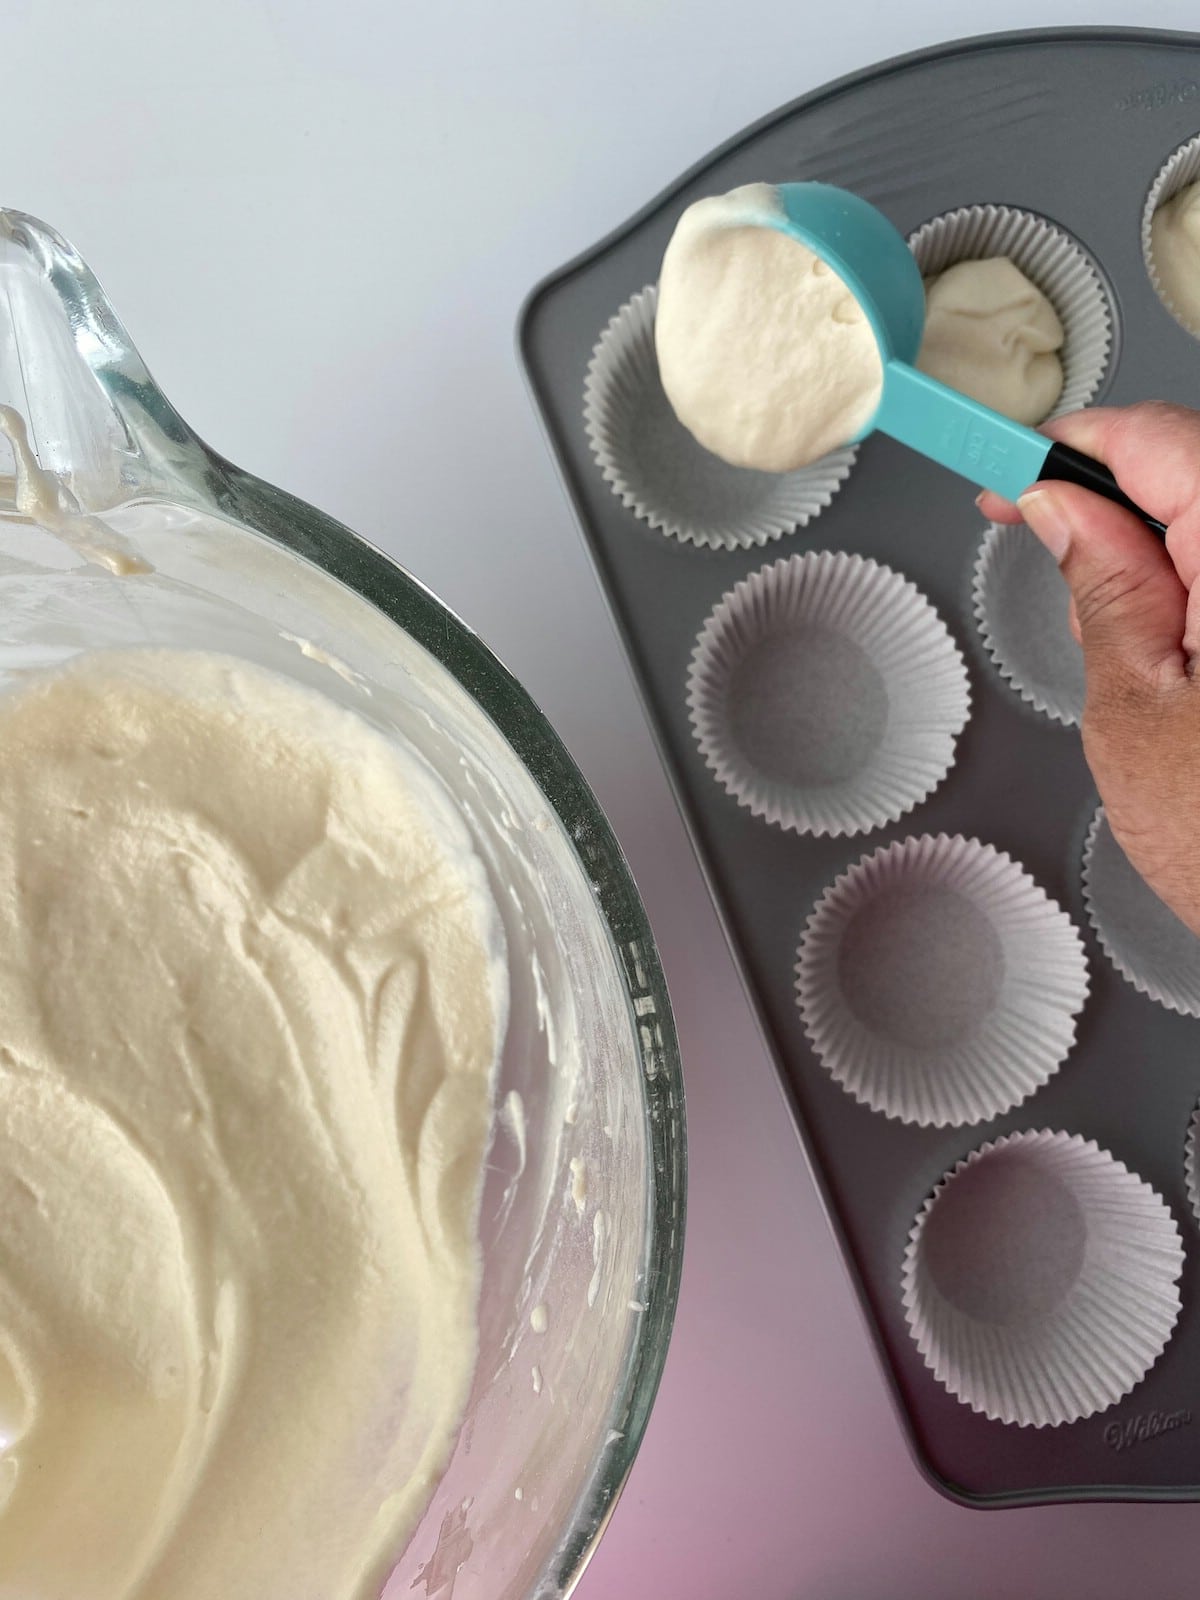 Scooping batter into cupcake liner